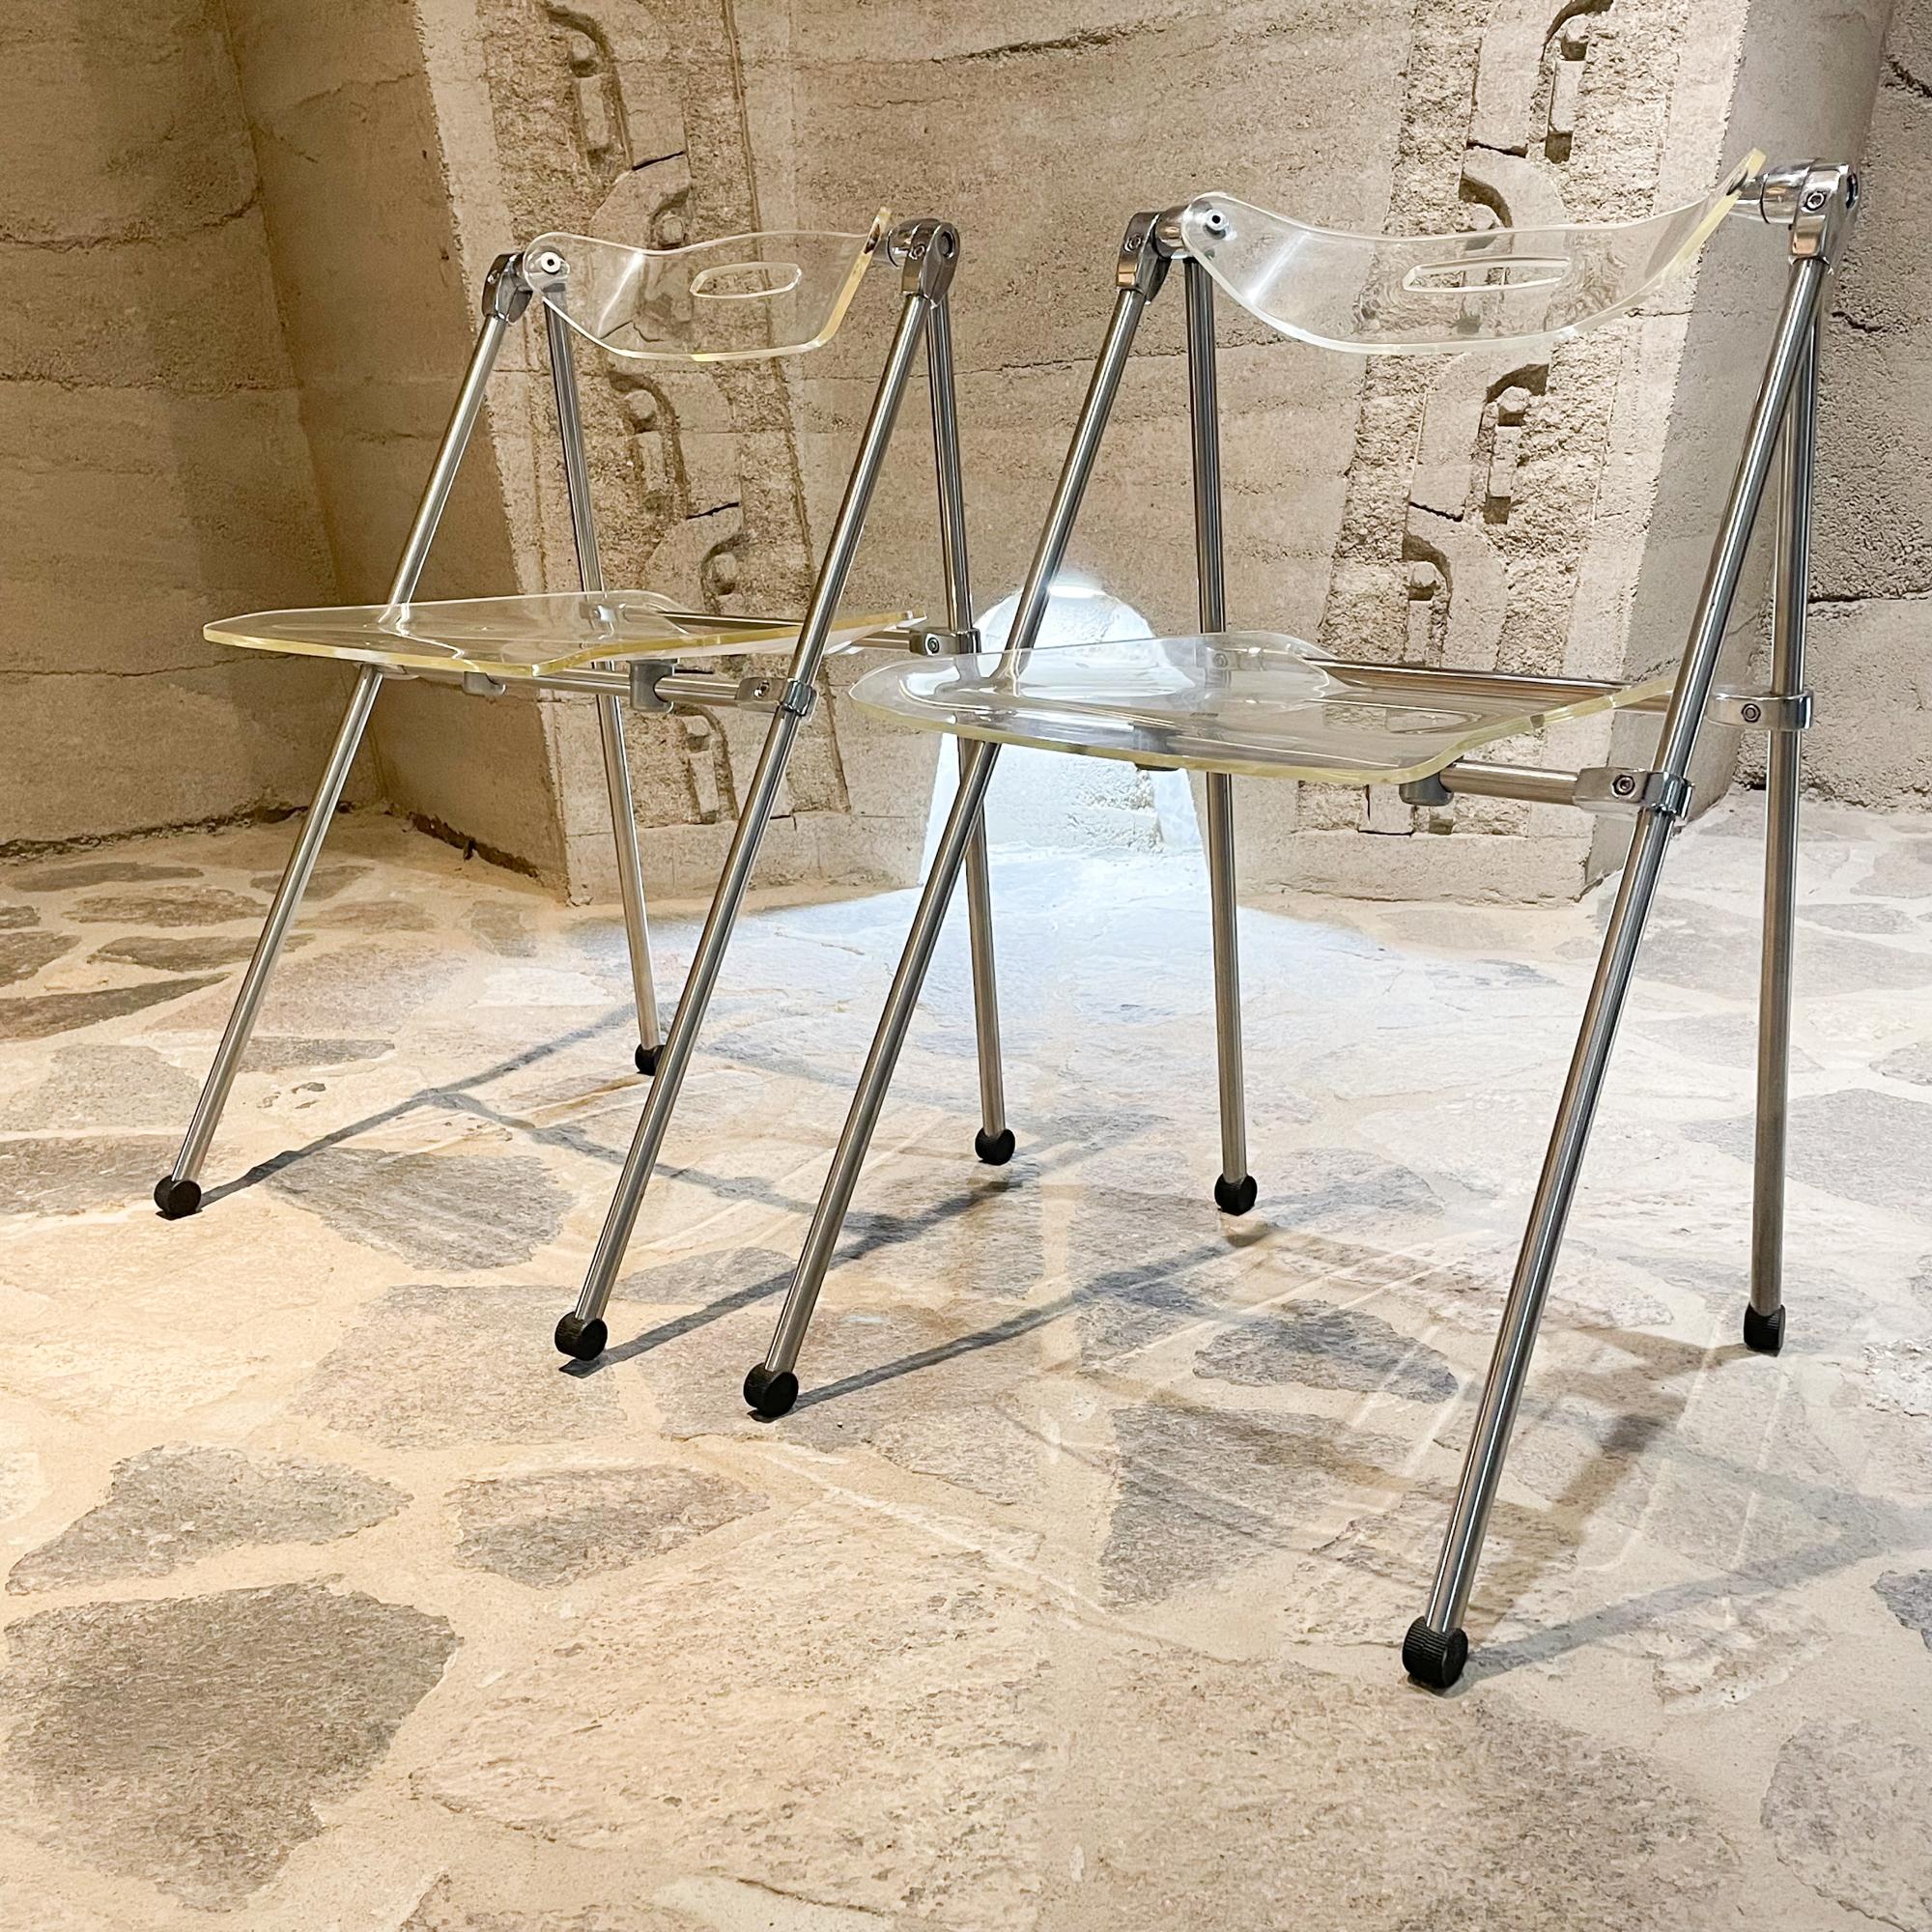 For your consideration: Mid-Century Modern Italy 1960s Pair of Lucite folding chairs 
Style attributed to Giancarlo Piretti for Castelli. Unmarked.
Modern Italian Clean Design.
Original feet caps. Thick clear Lucite. Sleek chrome